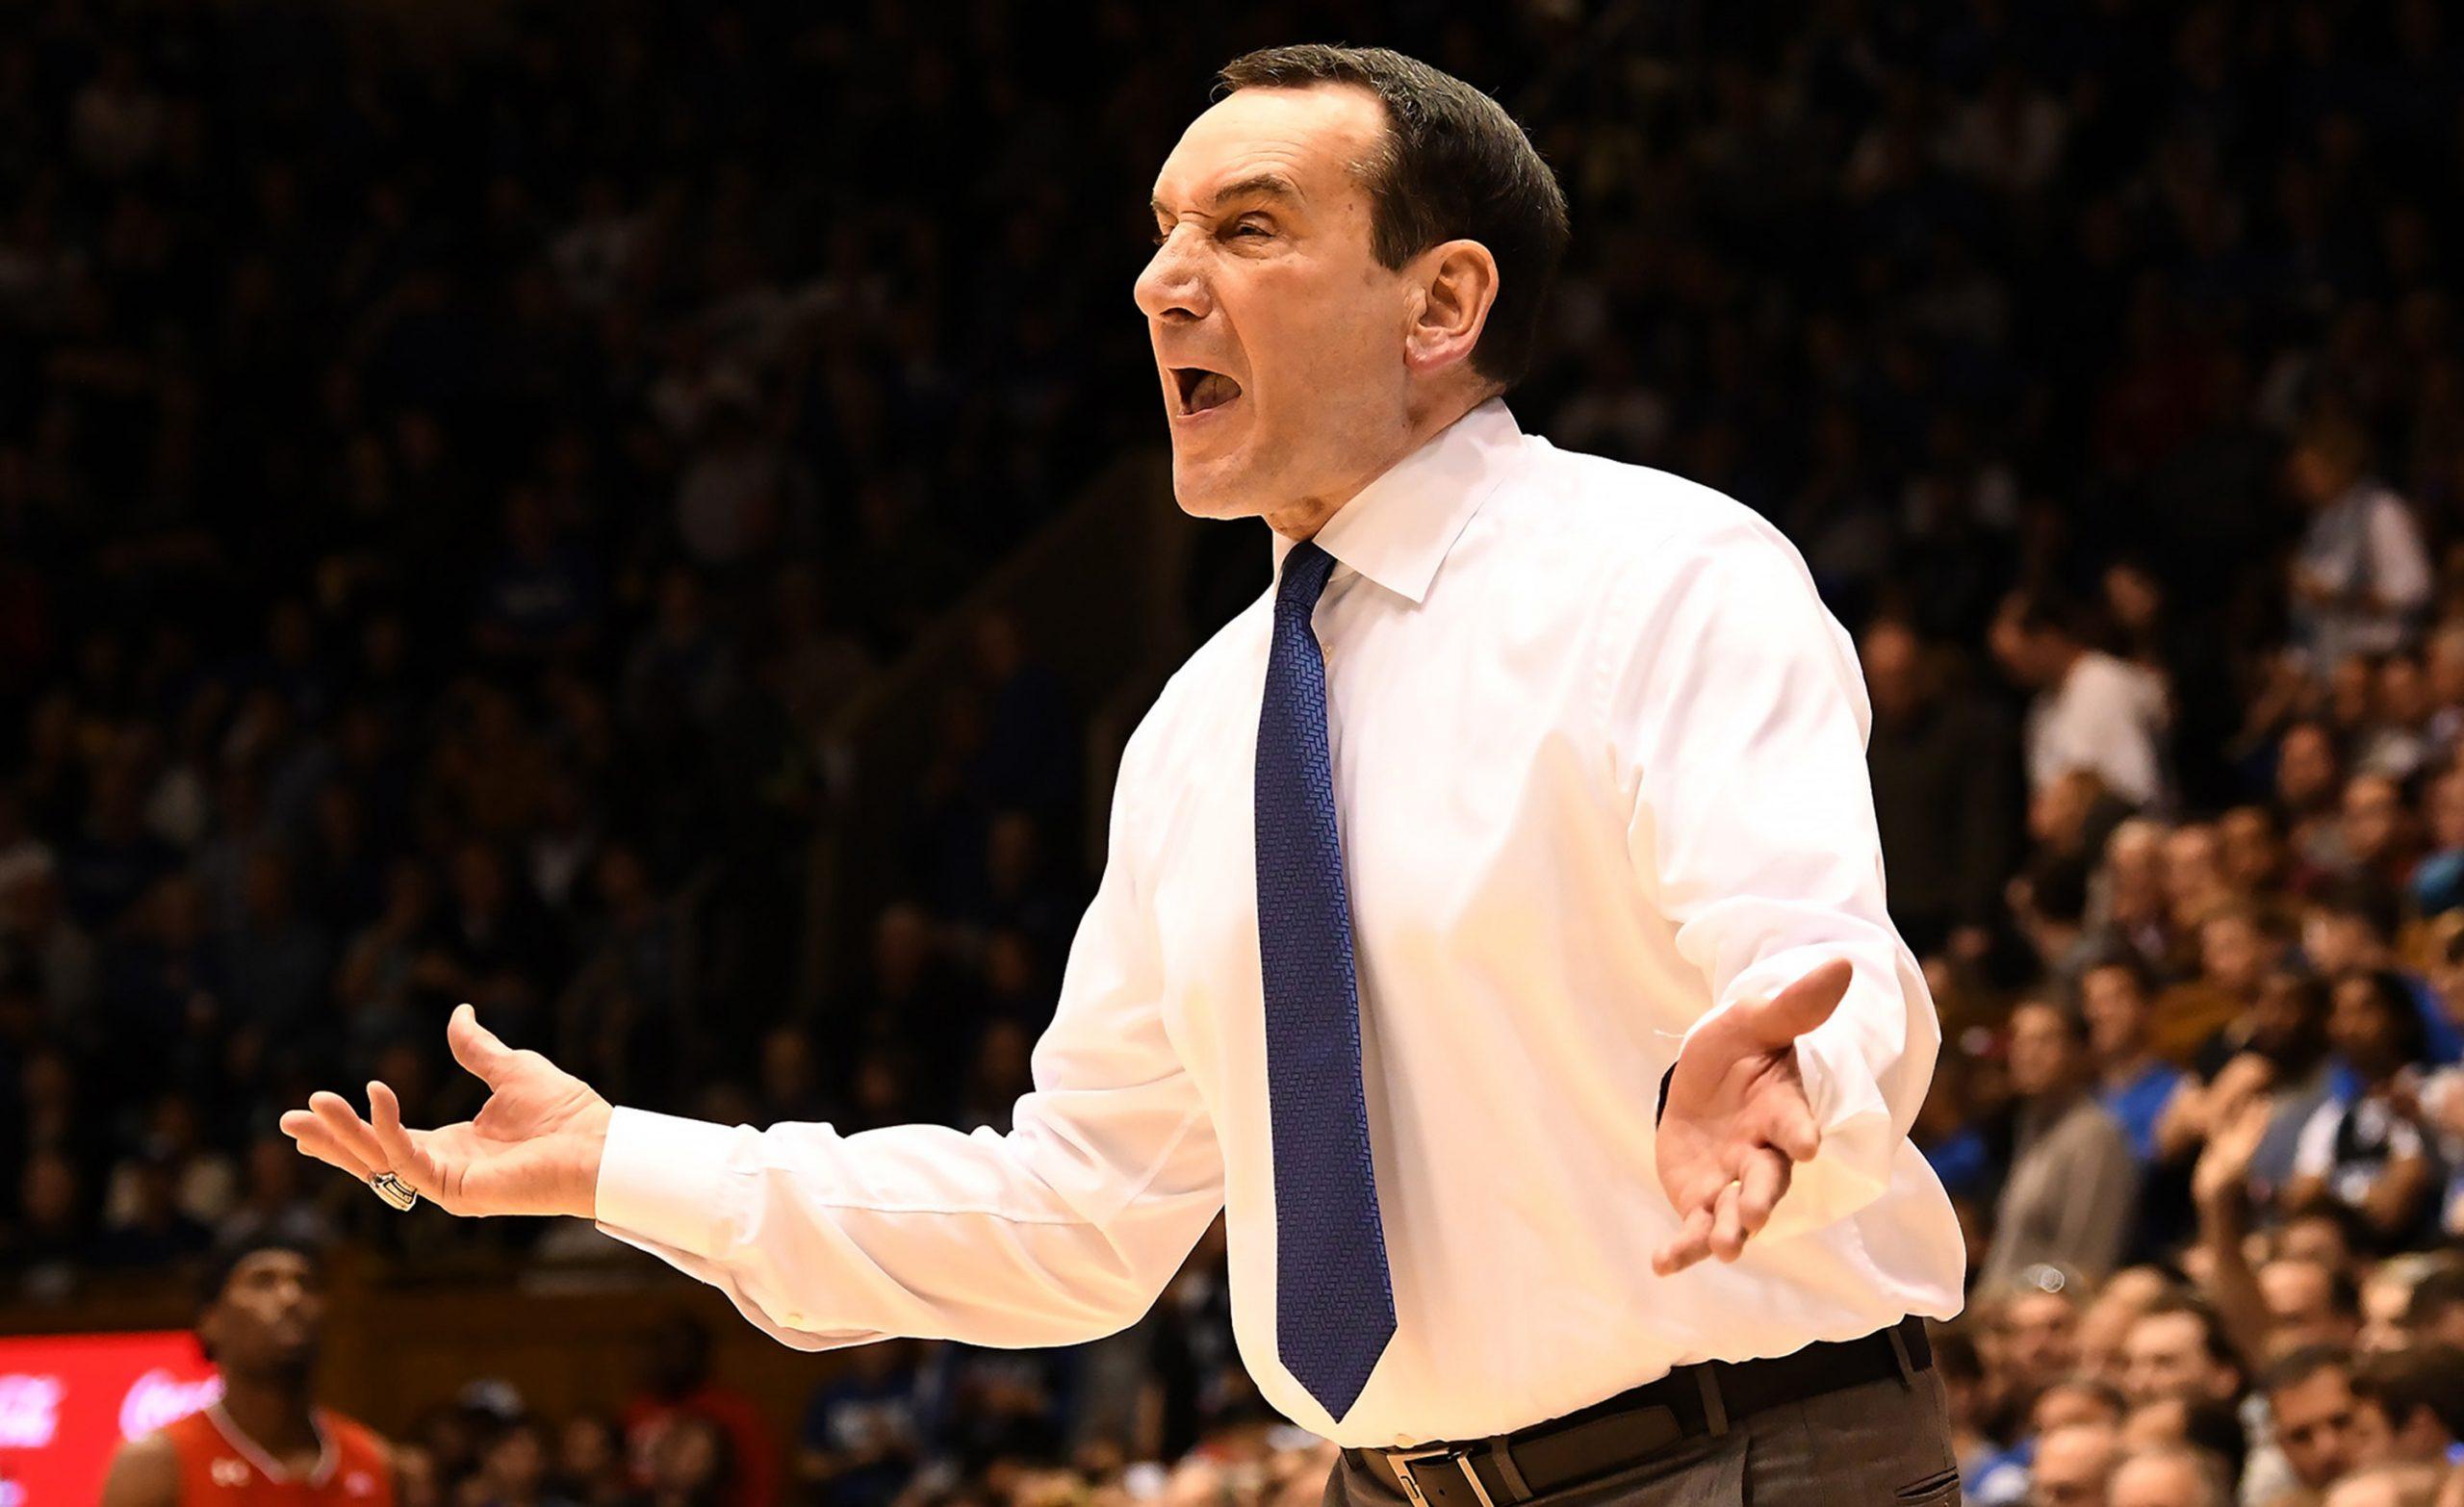 In a file image, Duke head coach Mike Krzyzewski questions a call in the second half of play against St. Johns at Cameron Indoor Stadium in Durham, N.C., on Saturday, Feb. 2, 2019. Duke fell to Virginia Tech 77-72 on Tuesday. (Chuck Liddy/Raleigh News & Observer/TNS)